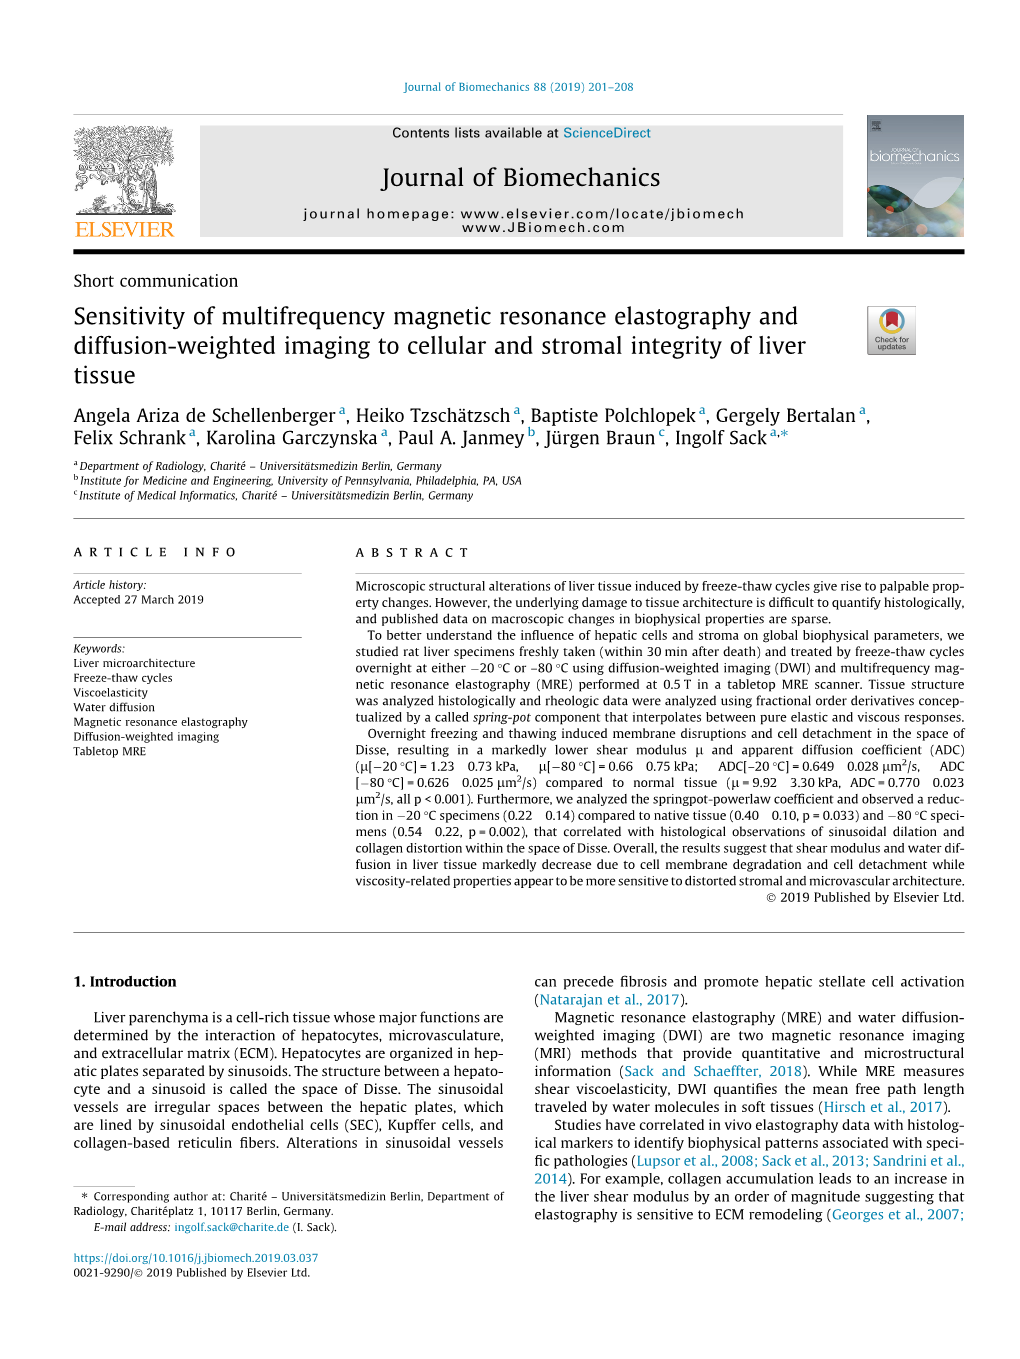 Sensitivity of Multifrequency Magnetic Resonance Elastography and Diffusion-Weighted Imaging to Cellular and Stromal Integrity of Liver Tissue